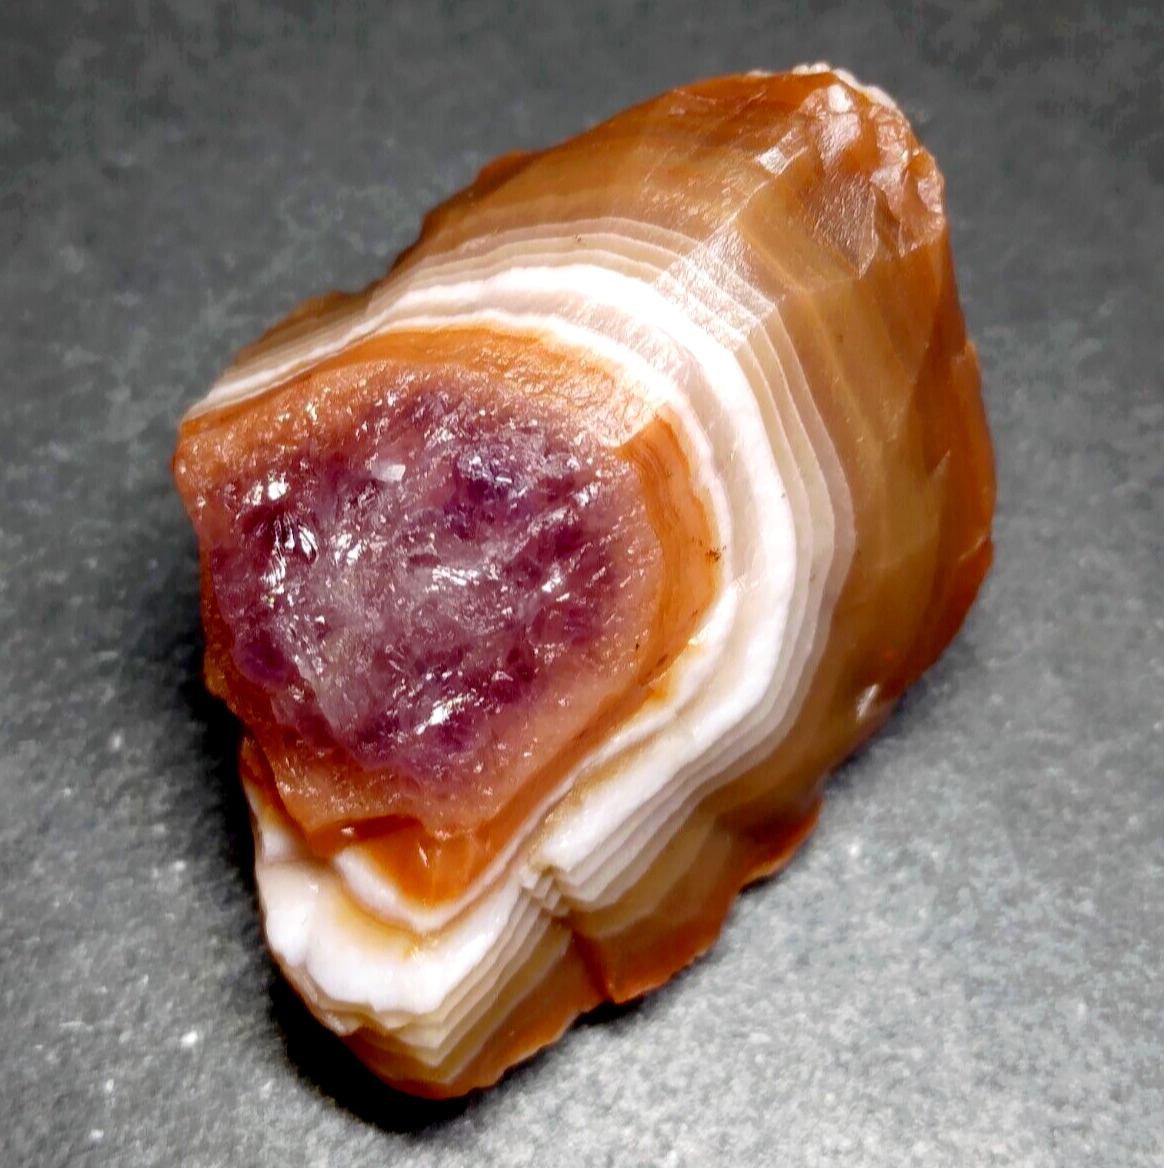 Lake Superior Agate 0.30 oz 'COLLECTORS BANDED AMETHYST' Rough Rare Gemstone